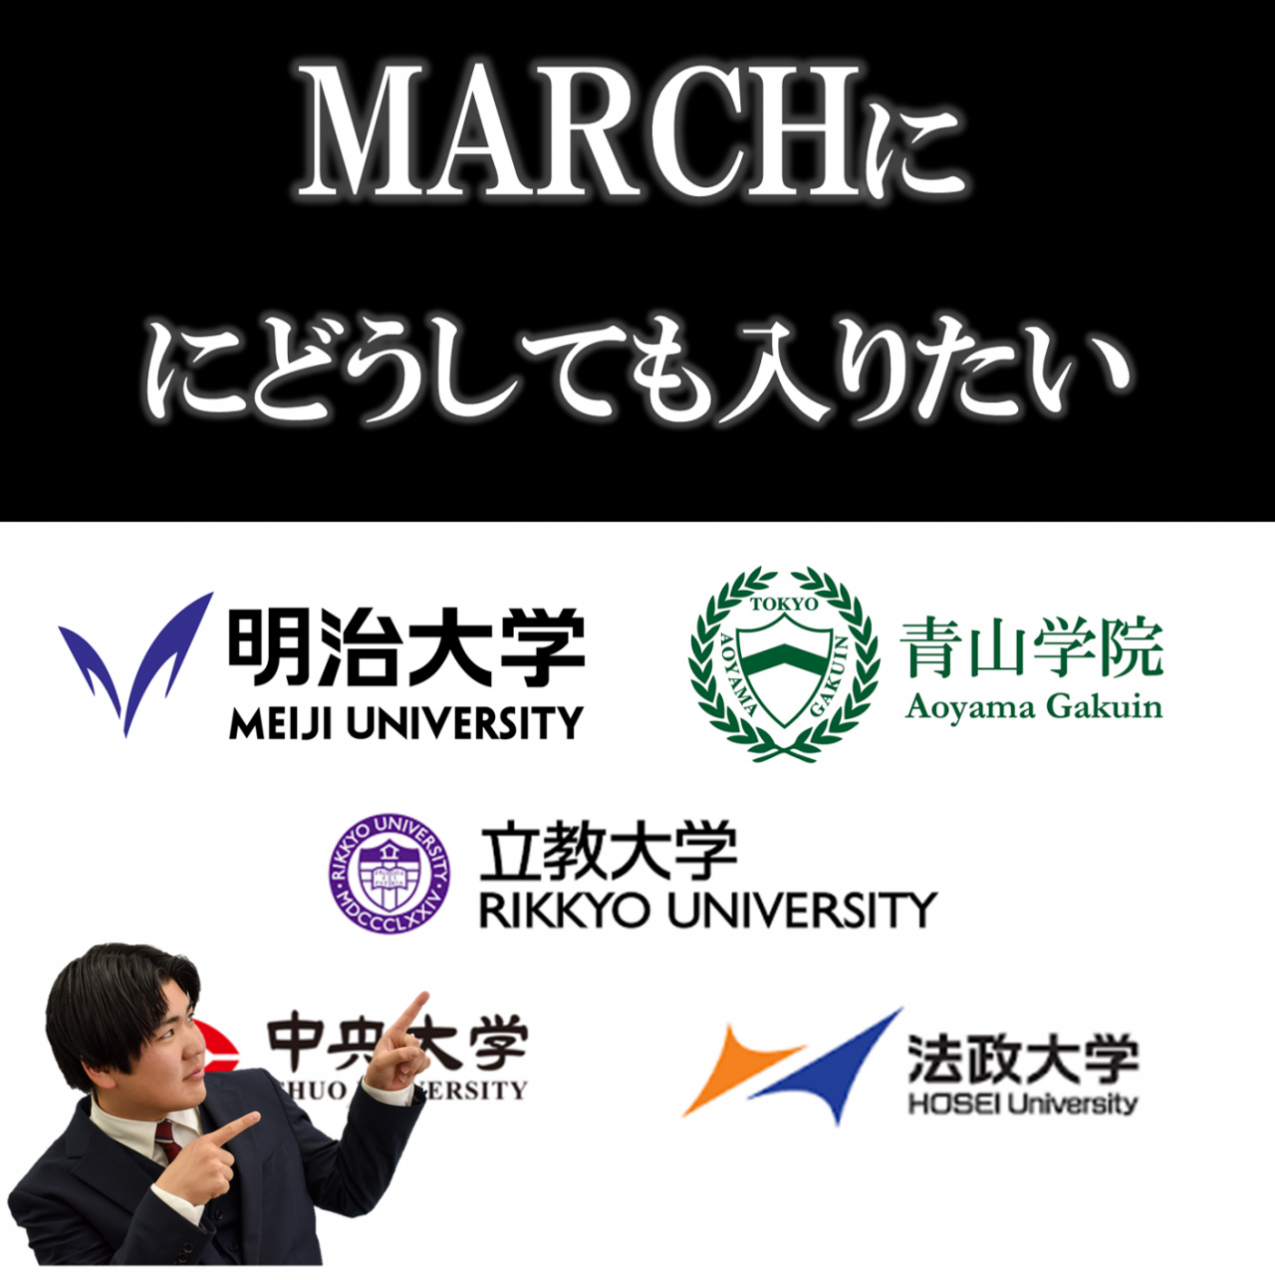 MARCH入りたい